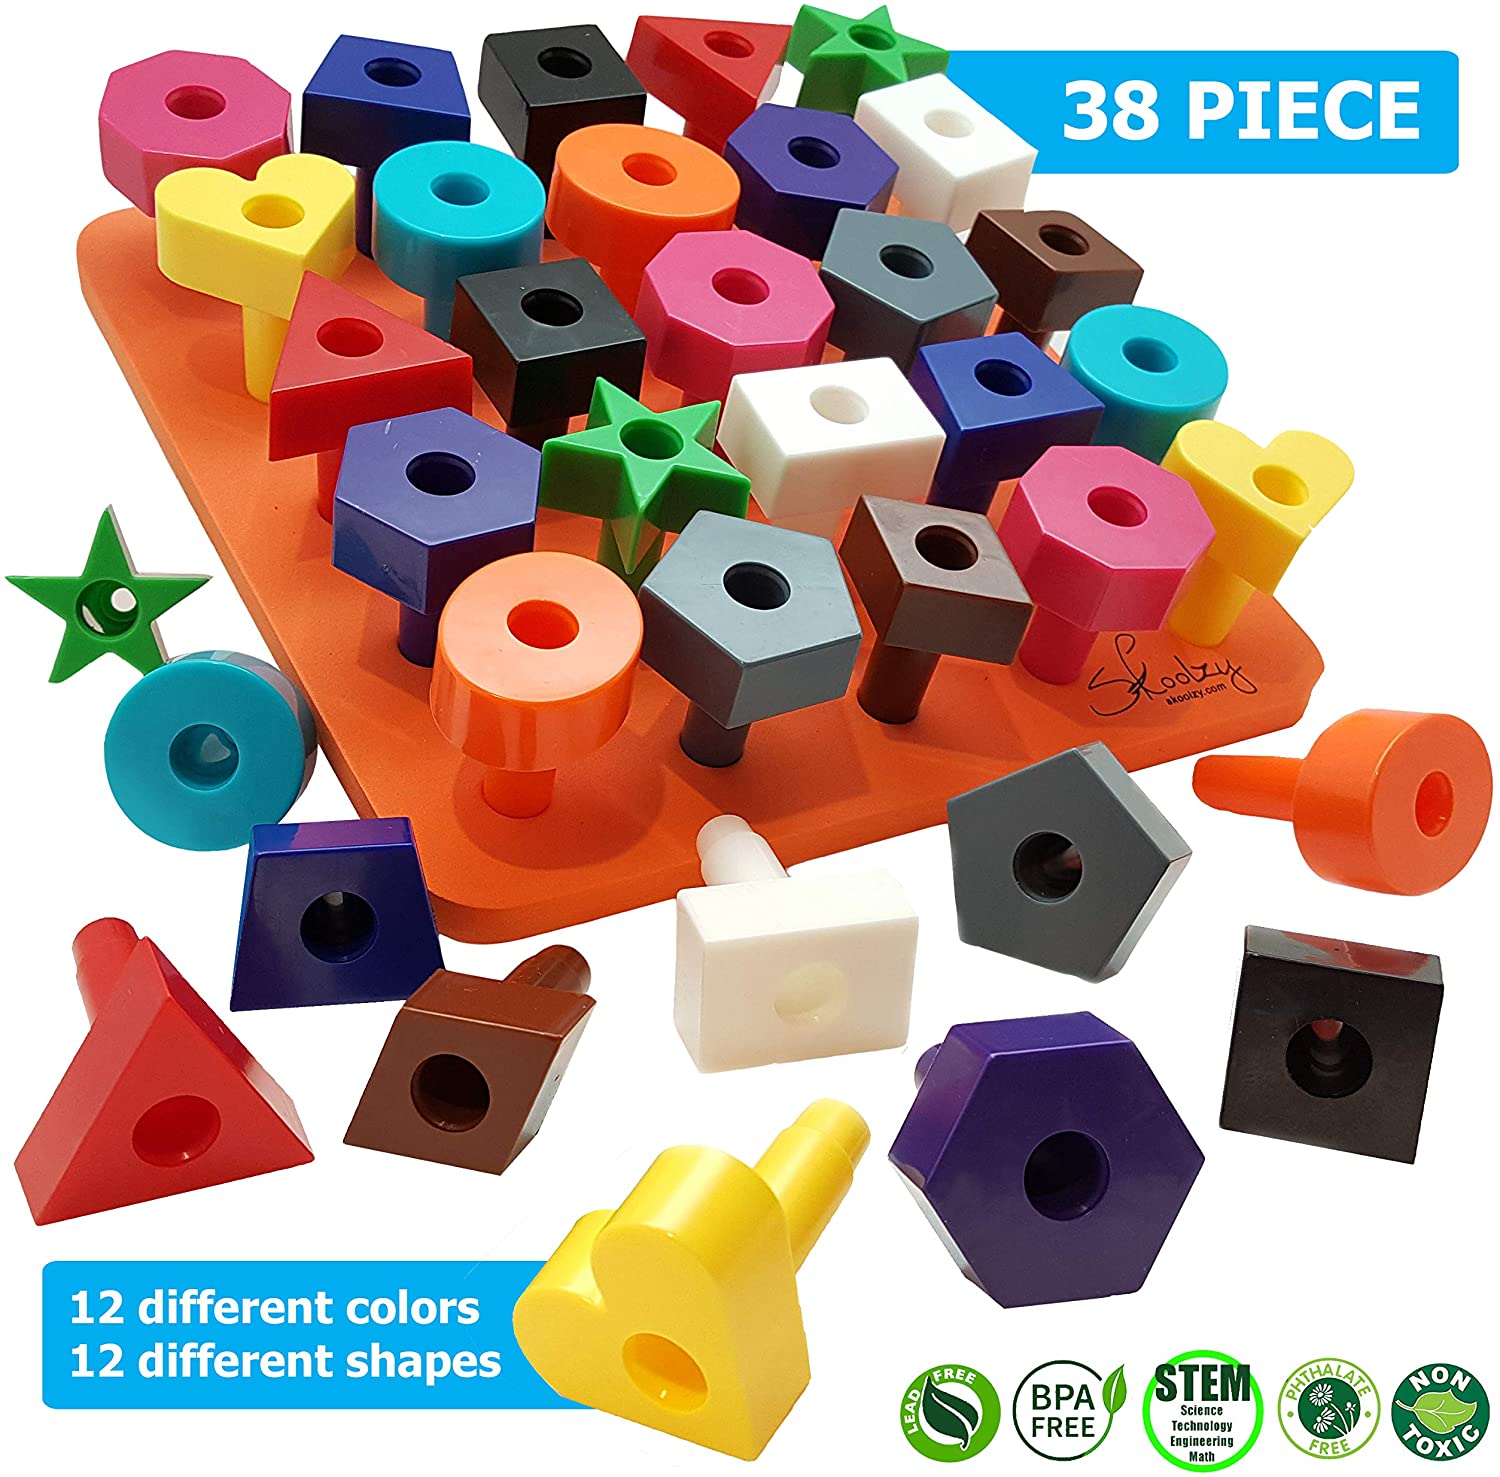 Basic Shapes and Colors Toddler Pegboard Set with Activity eBook.